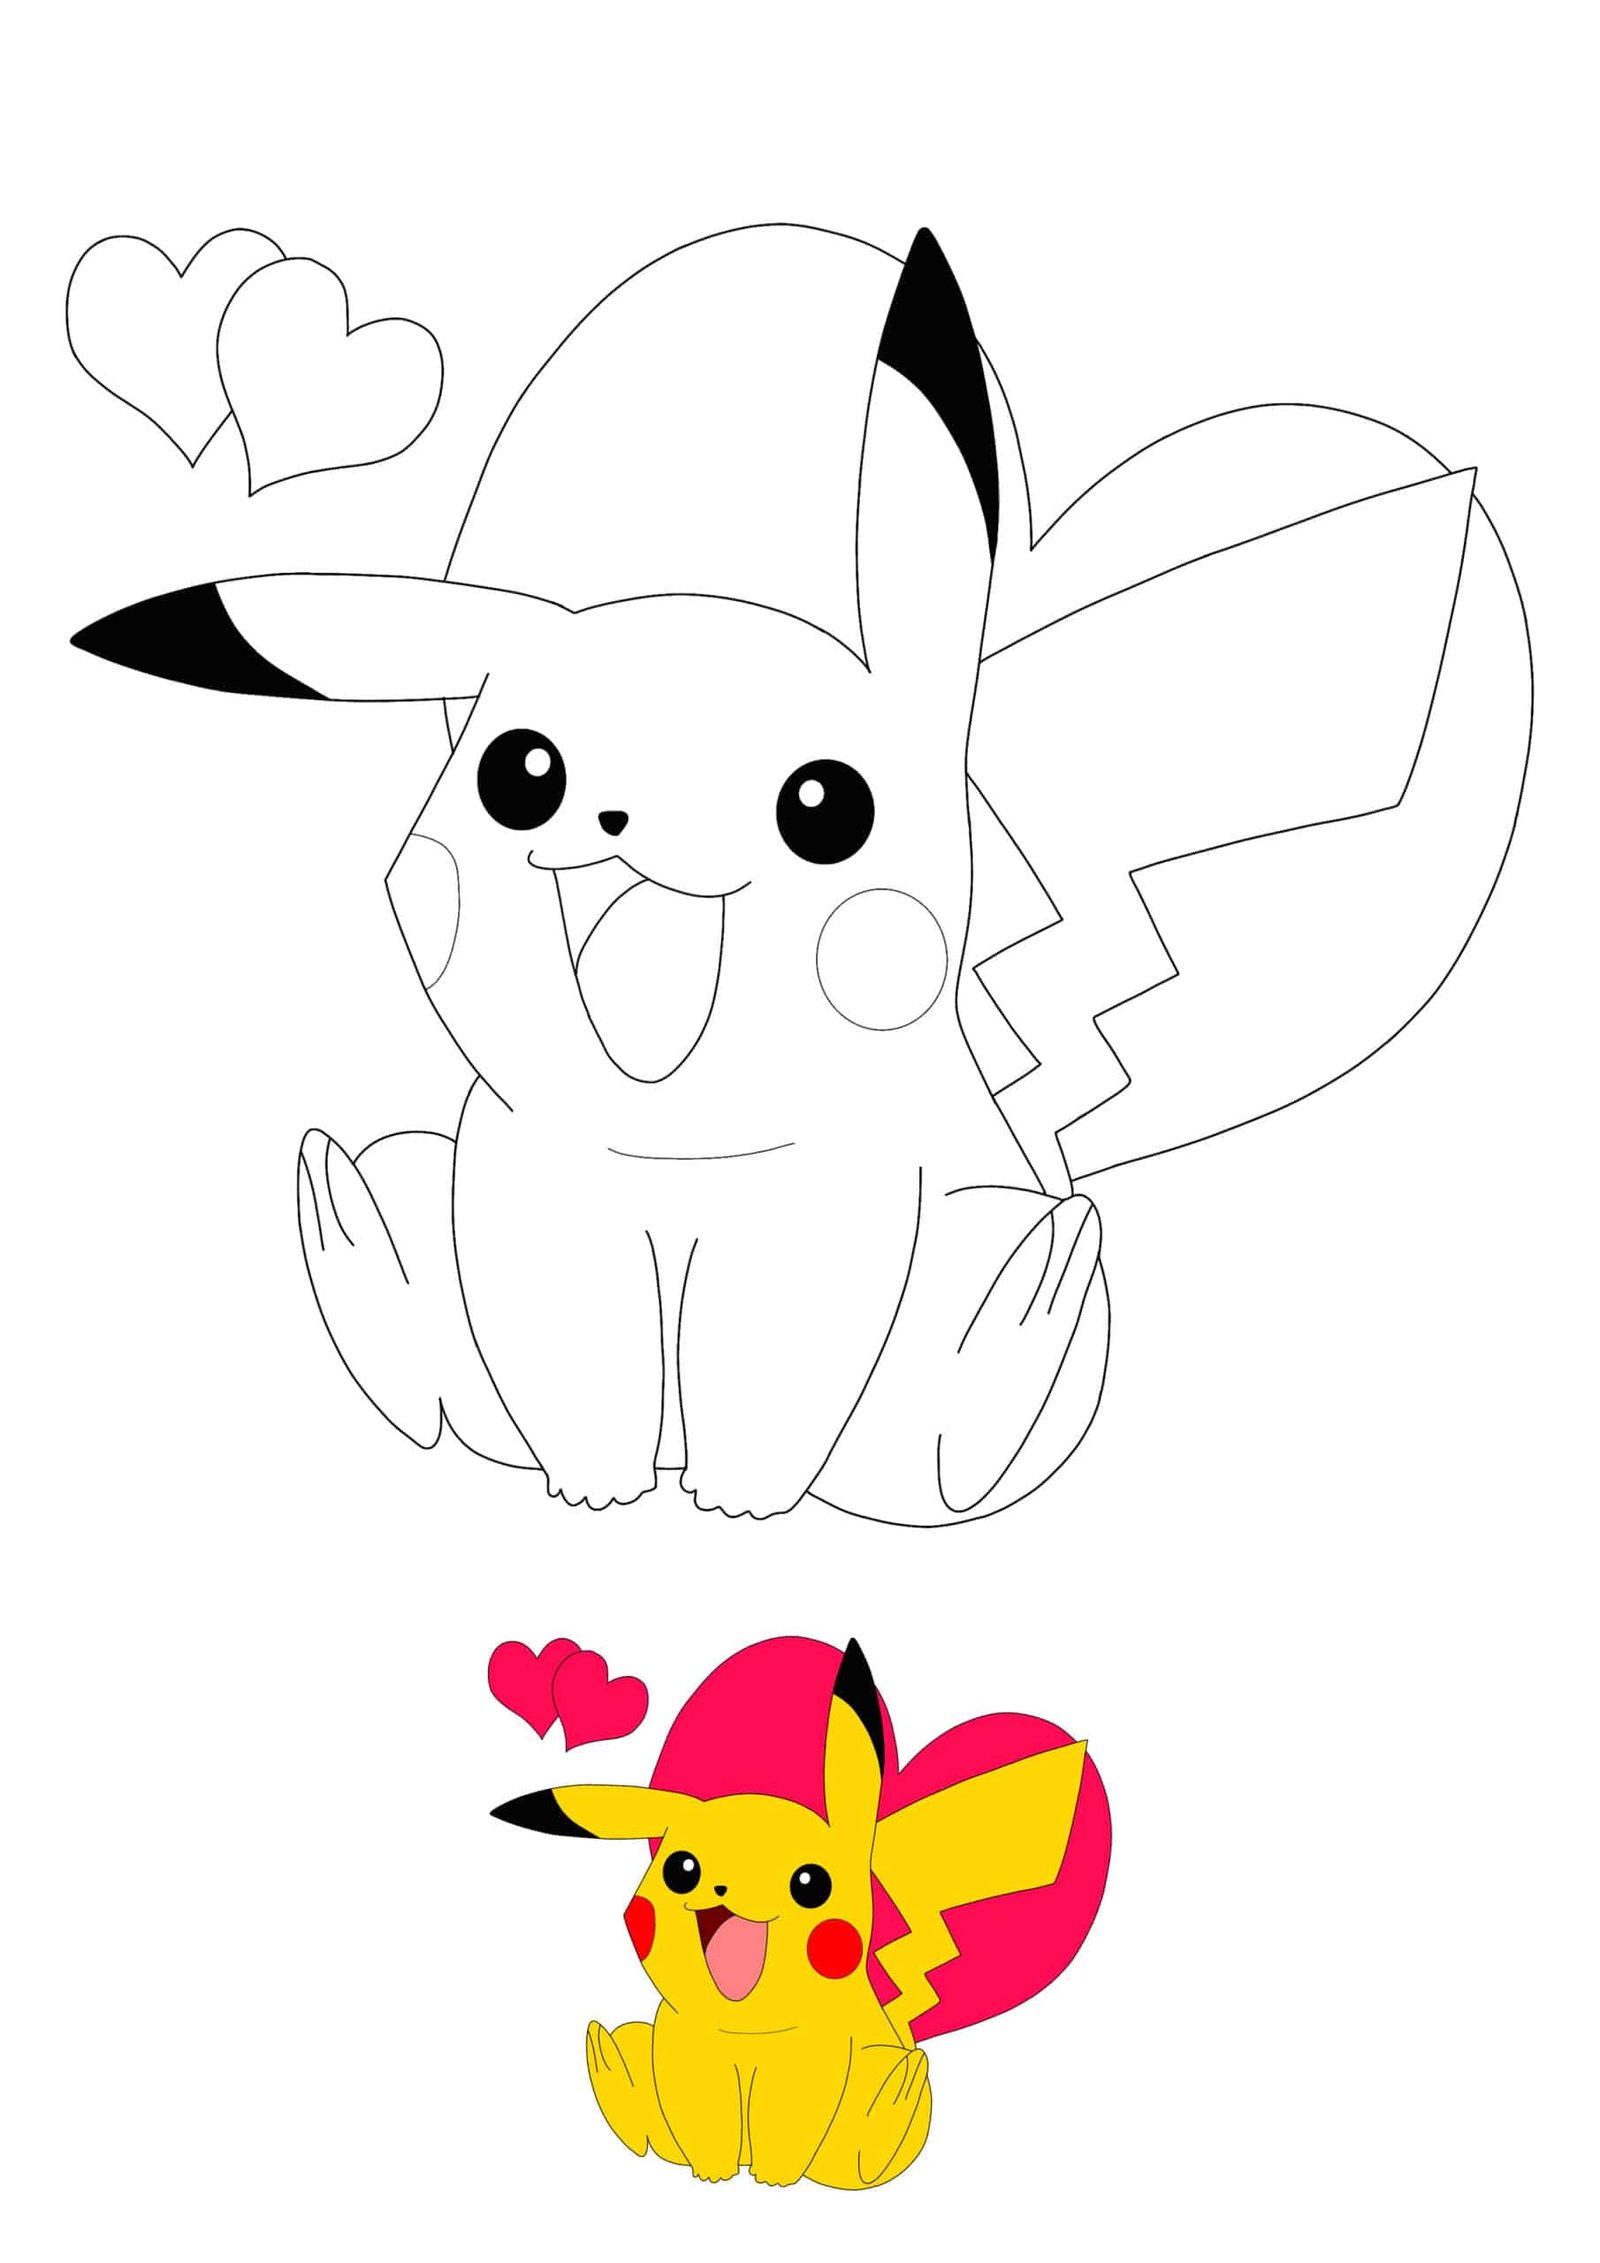 Cute Pikachu easy coloring page for kids